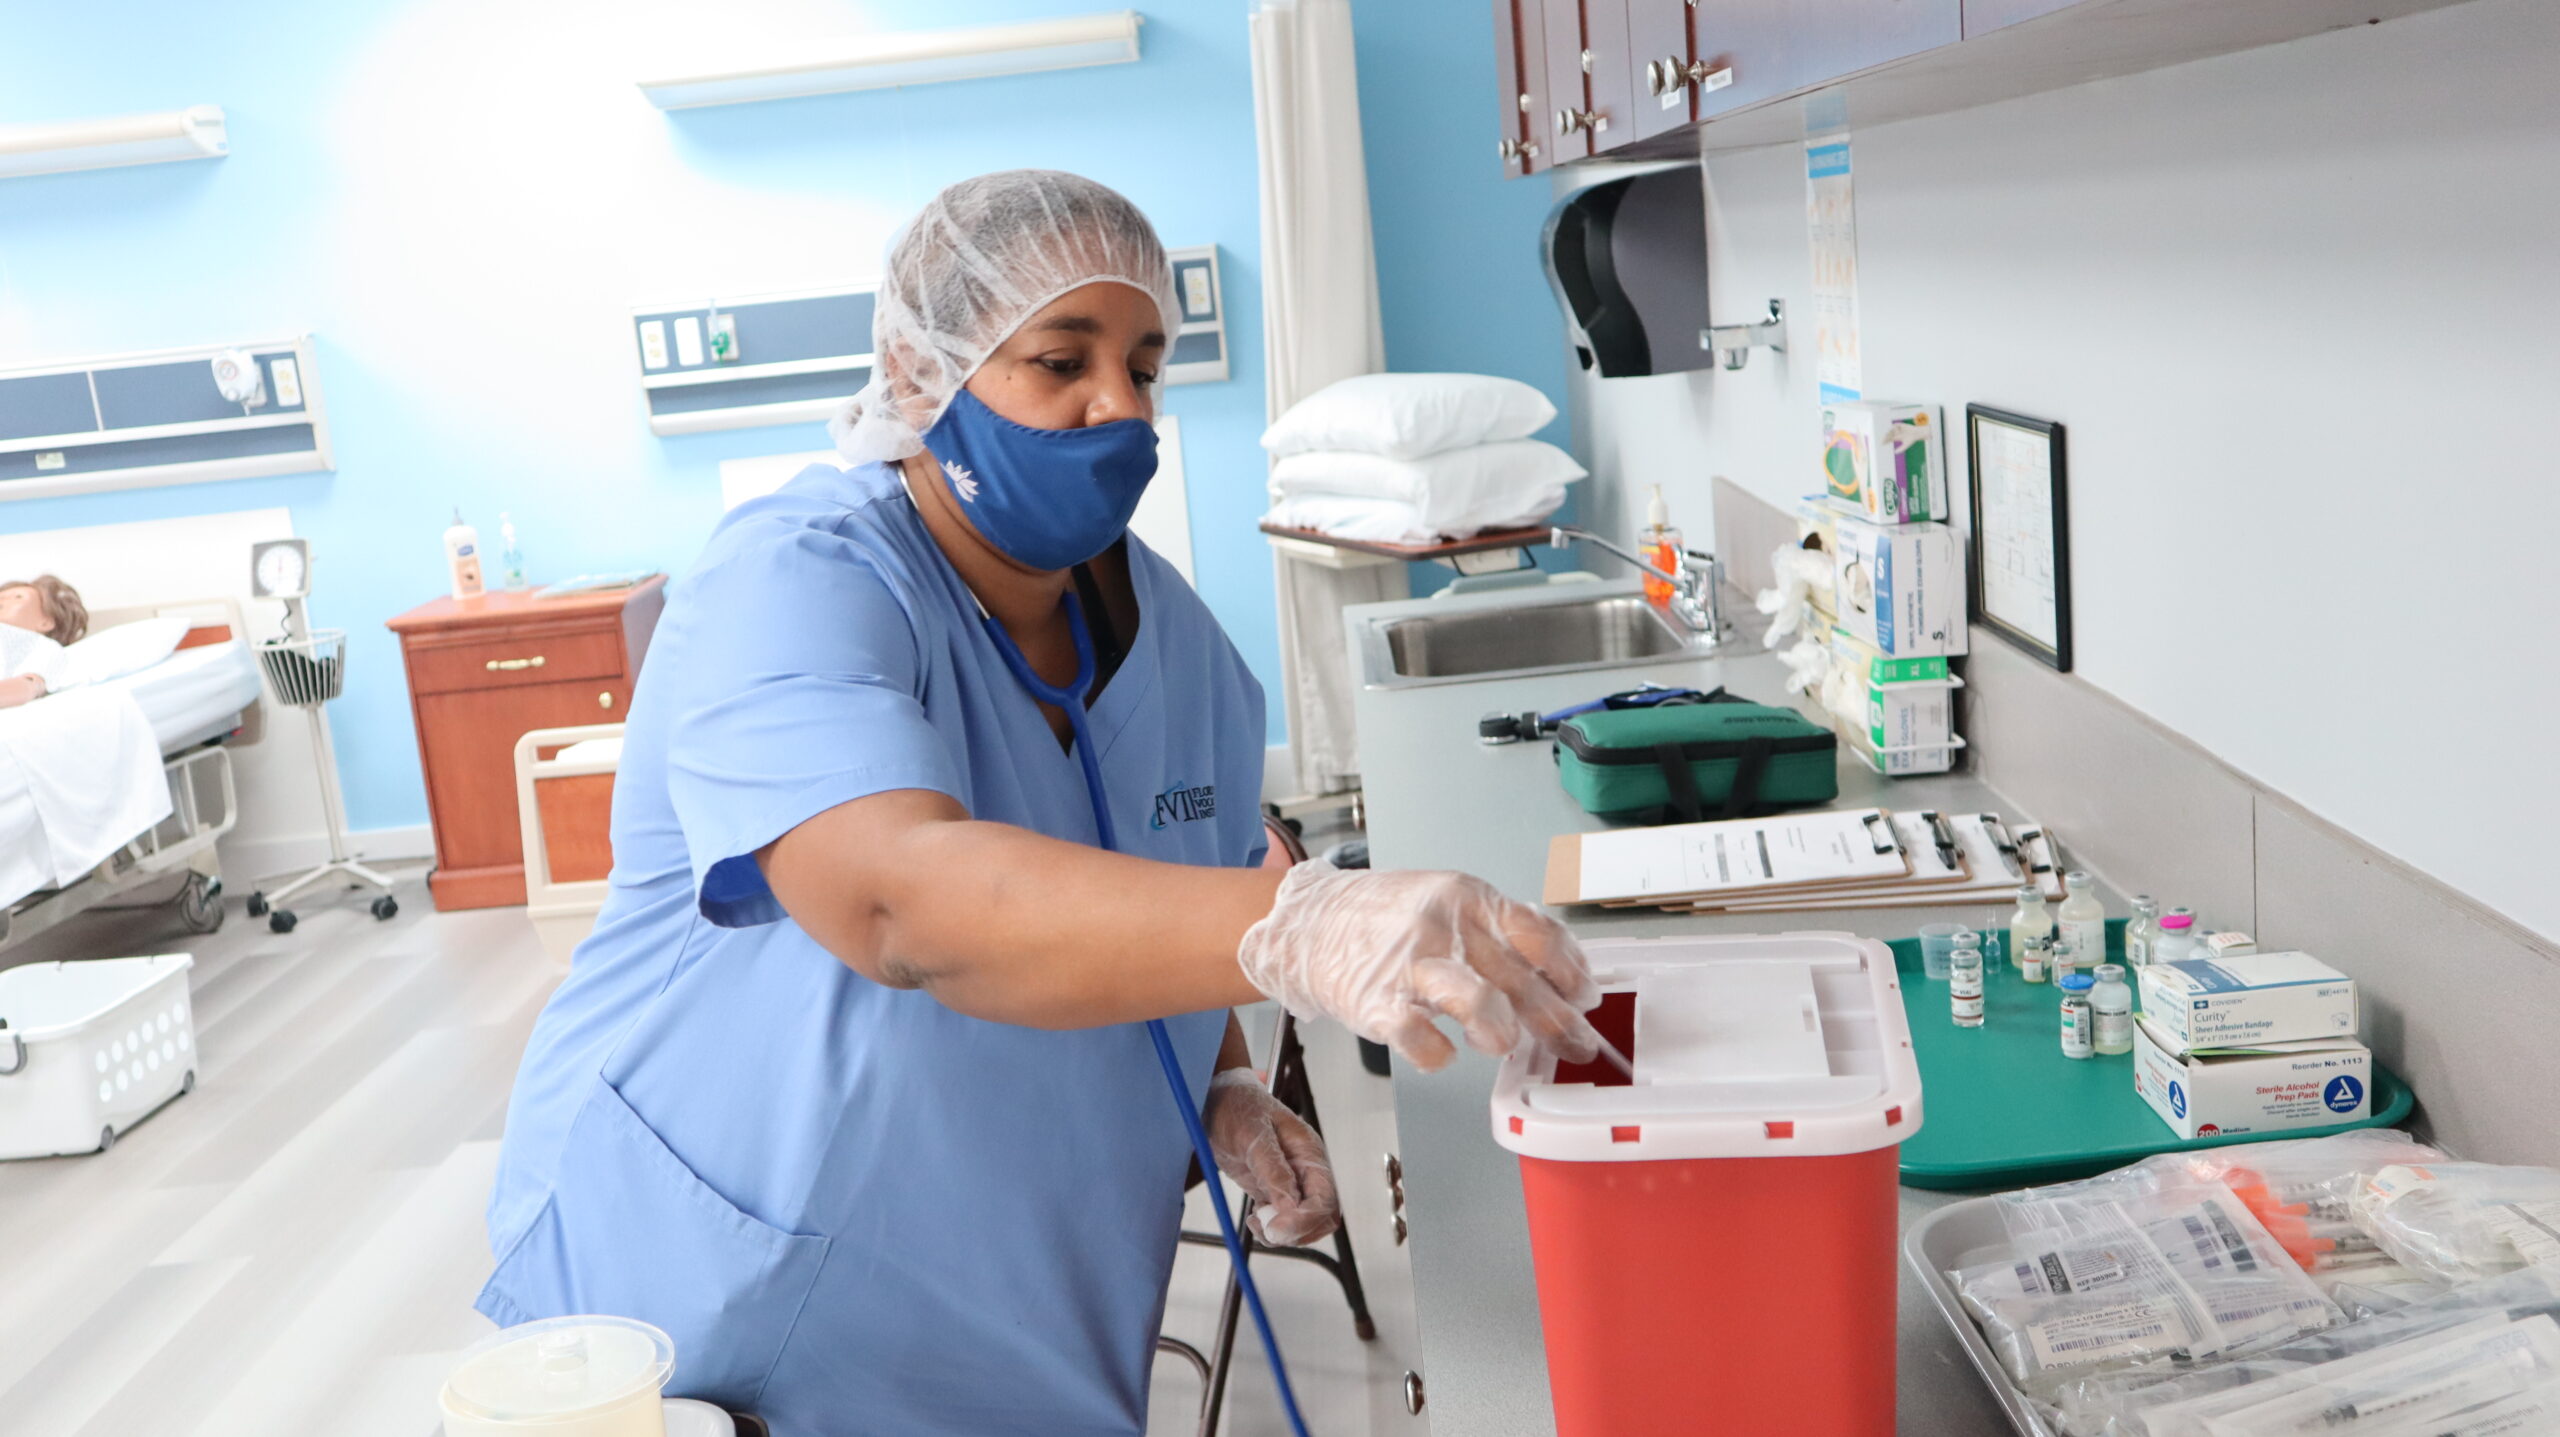 A healthcare student safely disposes of medical waste in a biohazard collection container in a skills lab